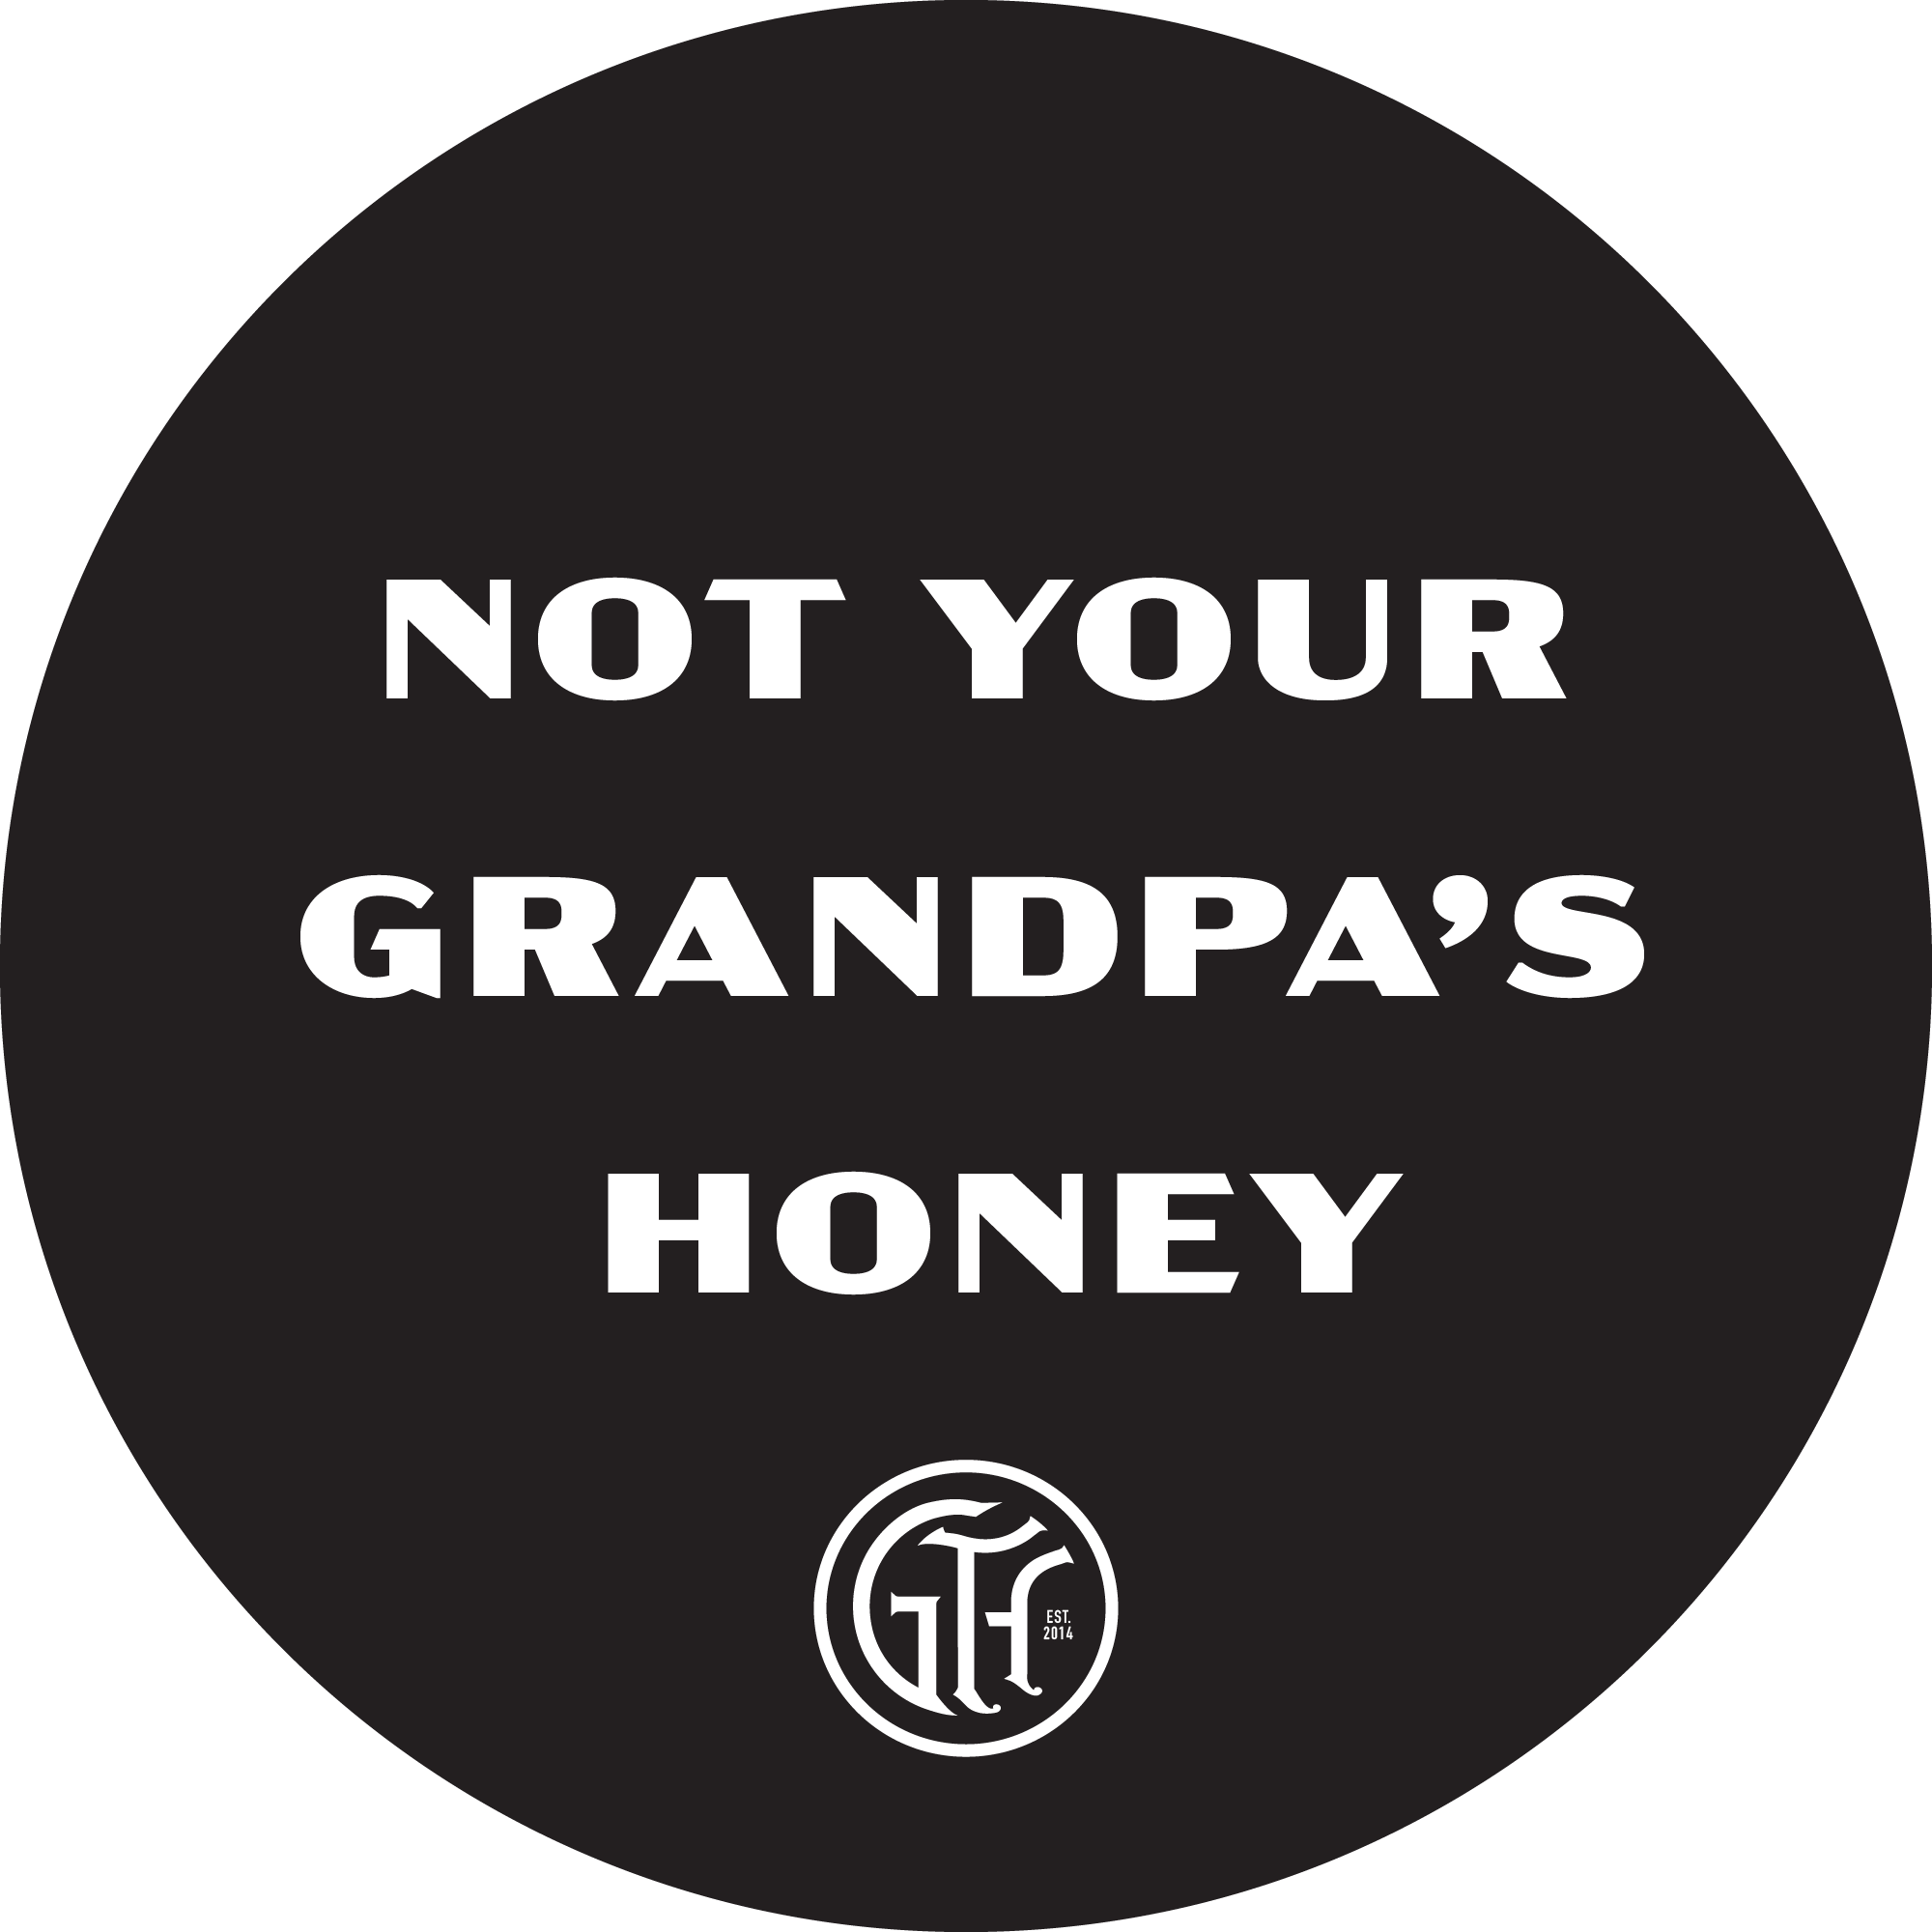 Honey not your Not Your